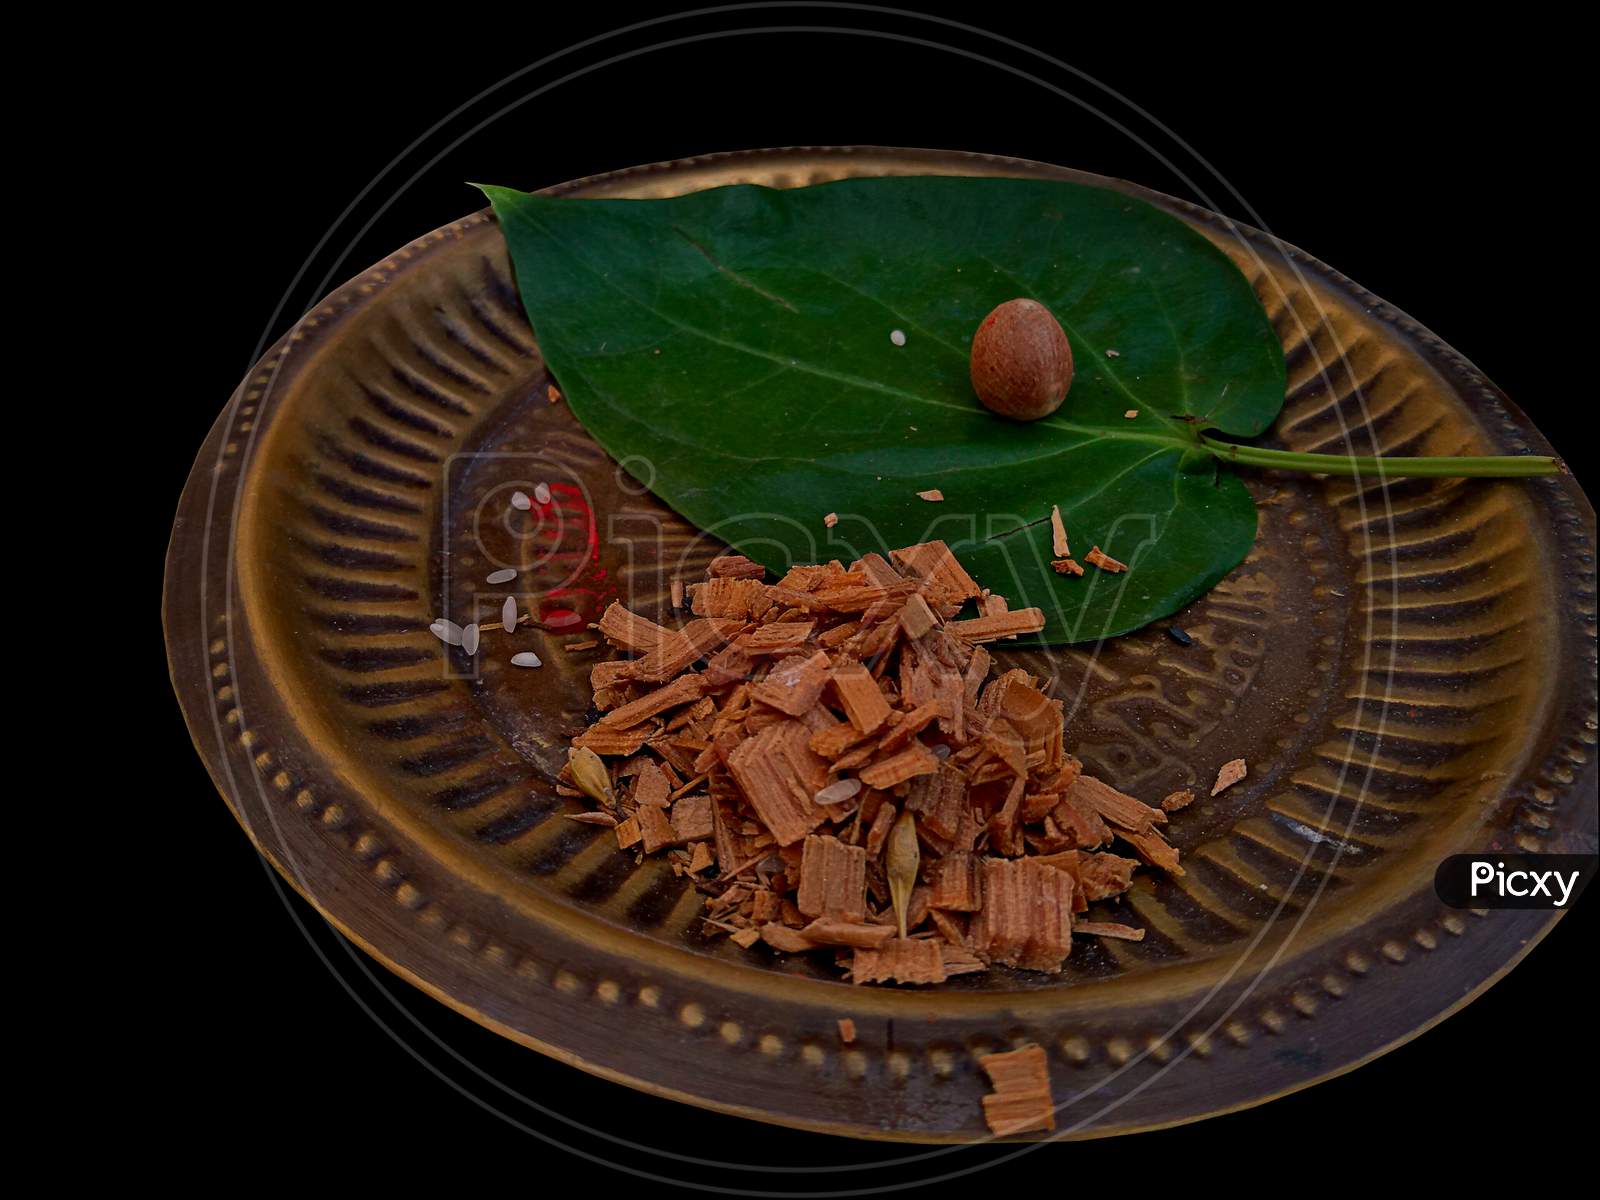 Betel leaf and small pieces of wood served on a aluminum plate are some of the things which are required during the prayer or worship in hindu.